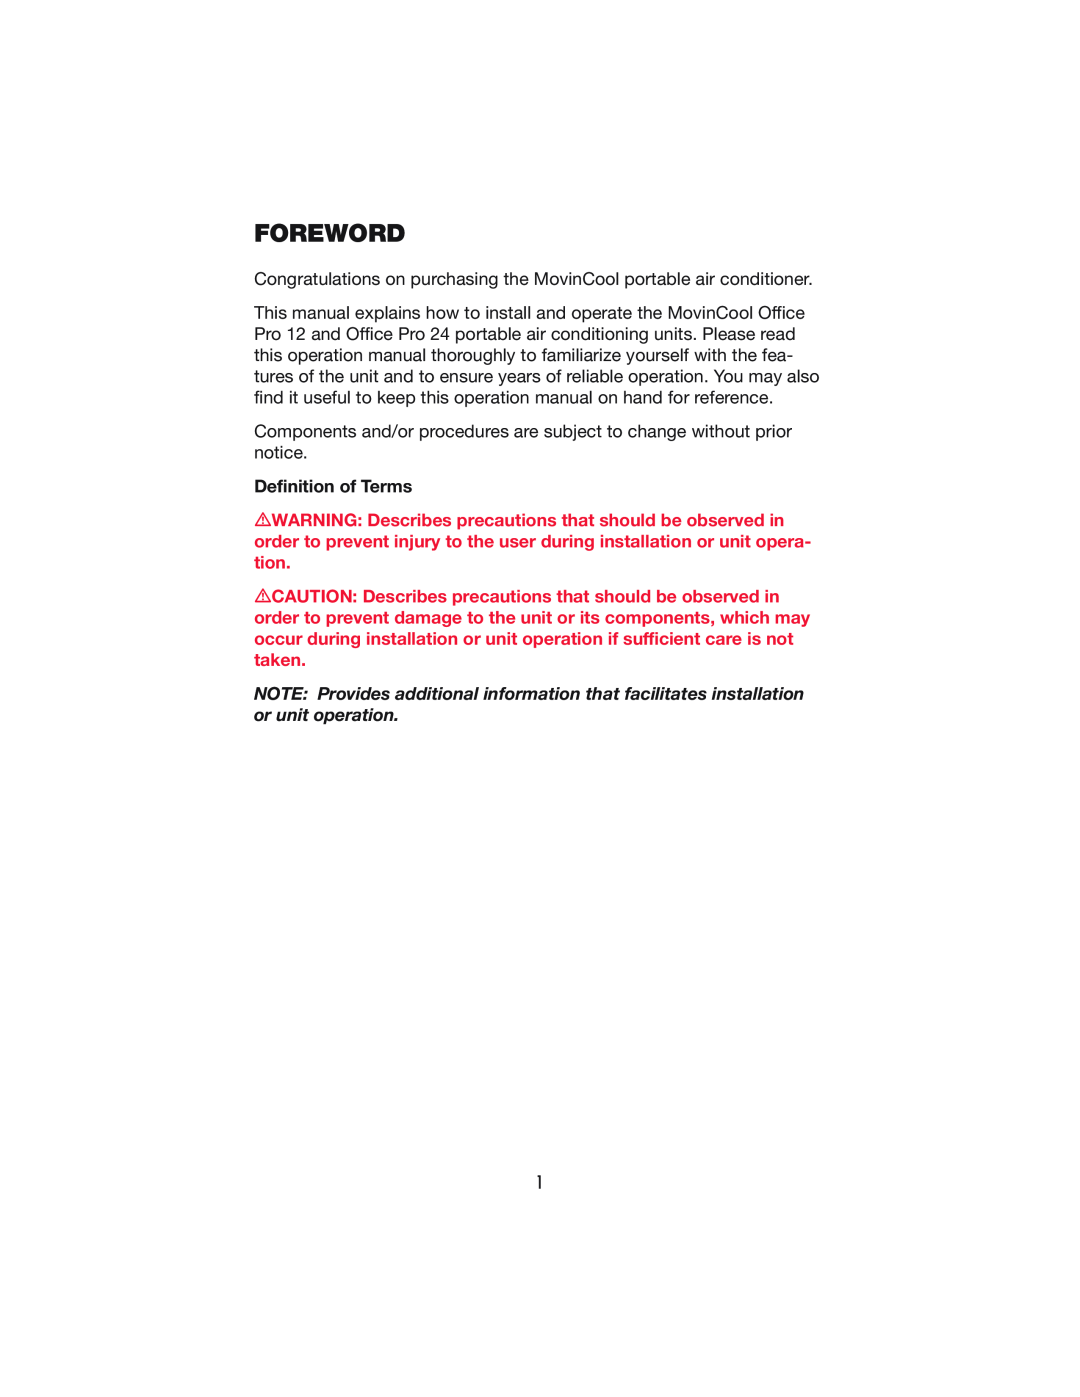 Denso OFFICE PRO 24, OFFICE PRO 12 operation manual Foreword, Definition of Terms 